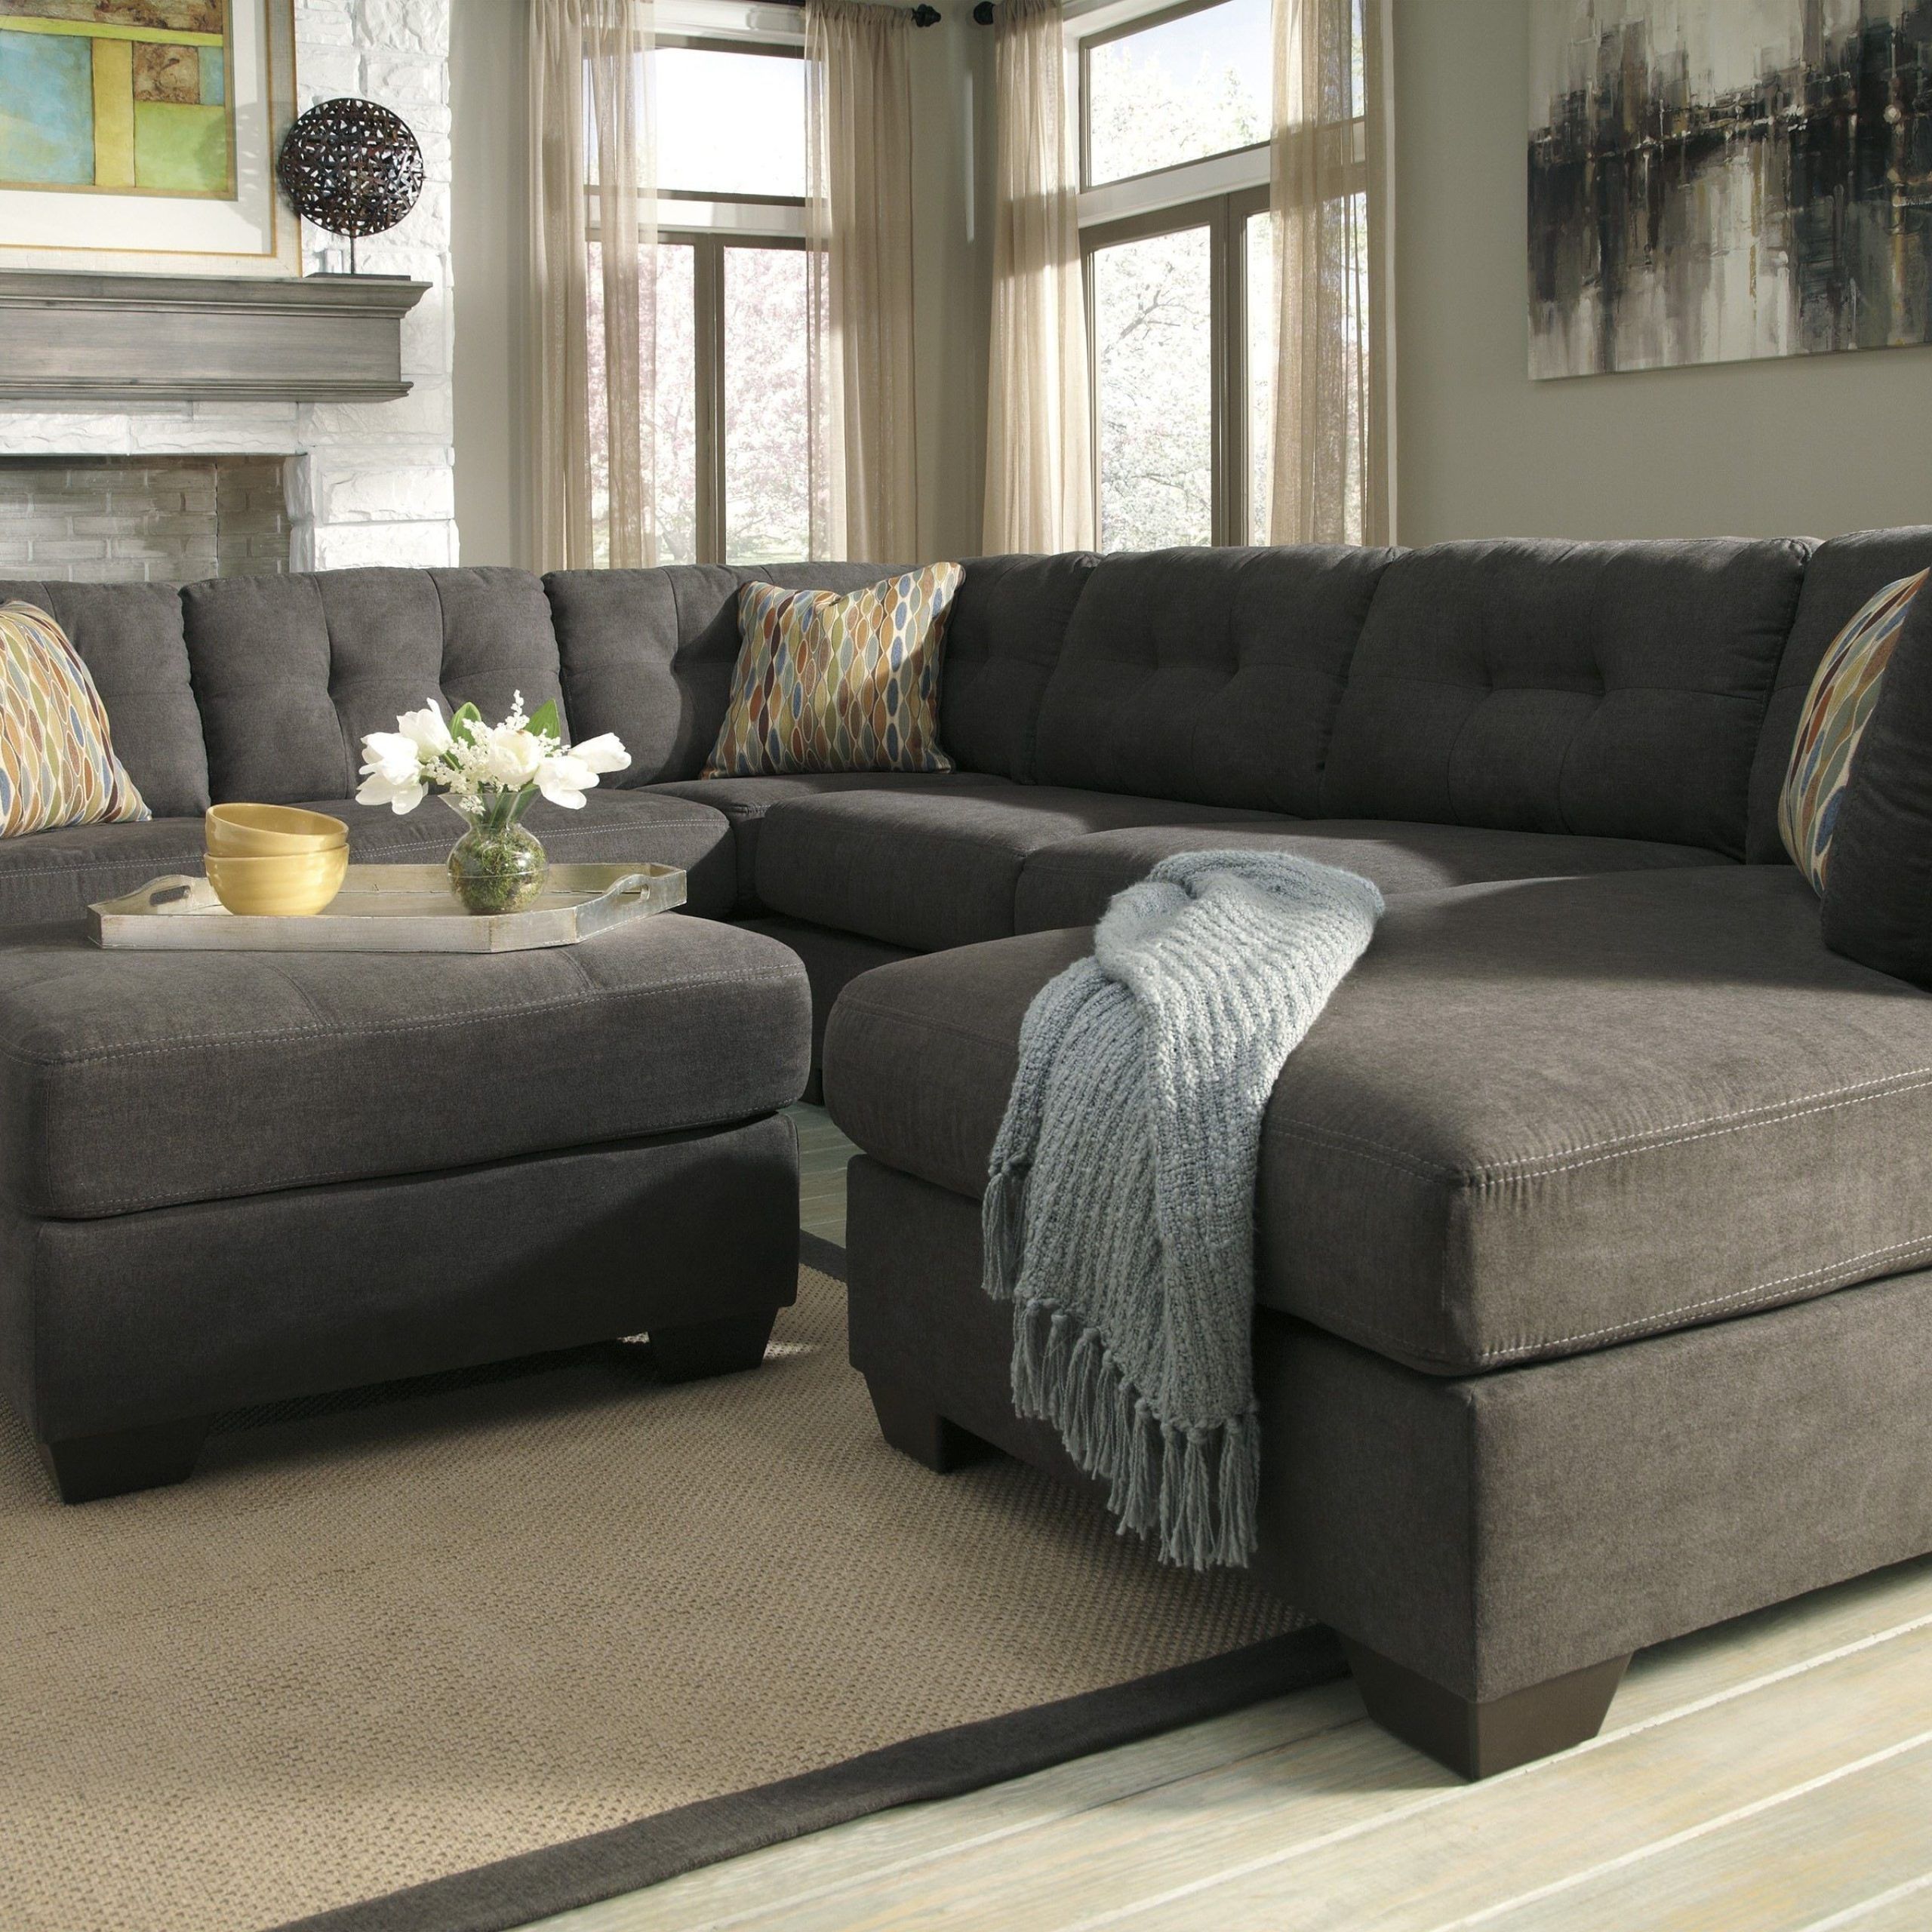 Brilliant Gray Sectional Sofa Modular Lounges Melbourne Inside Dark Grey Polyester Sofa Couches (Gallery 8 of 20)